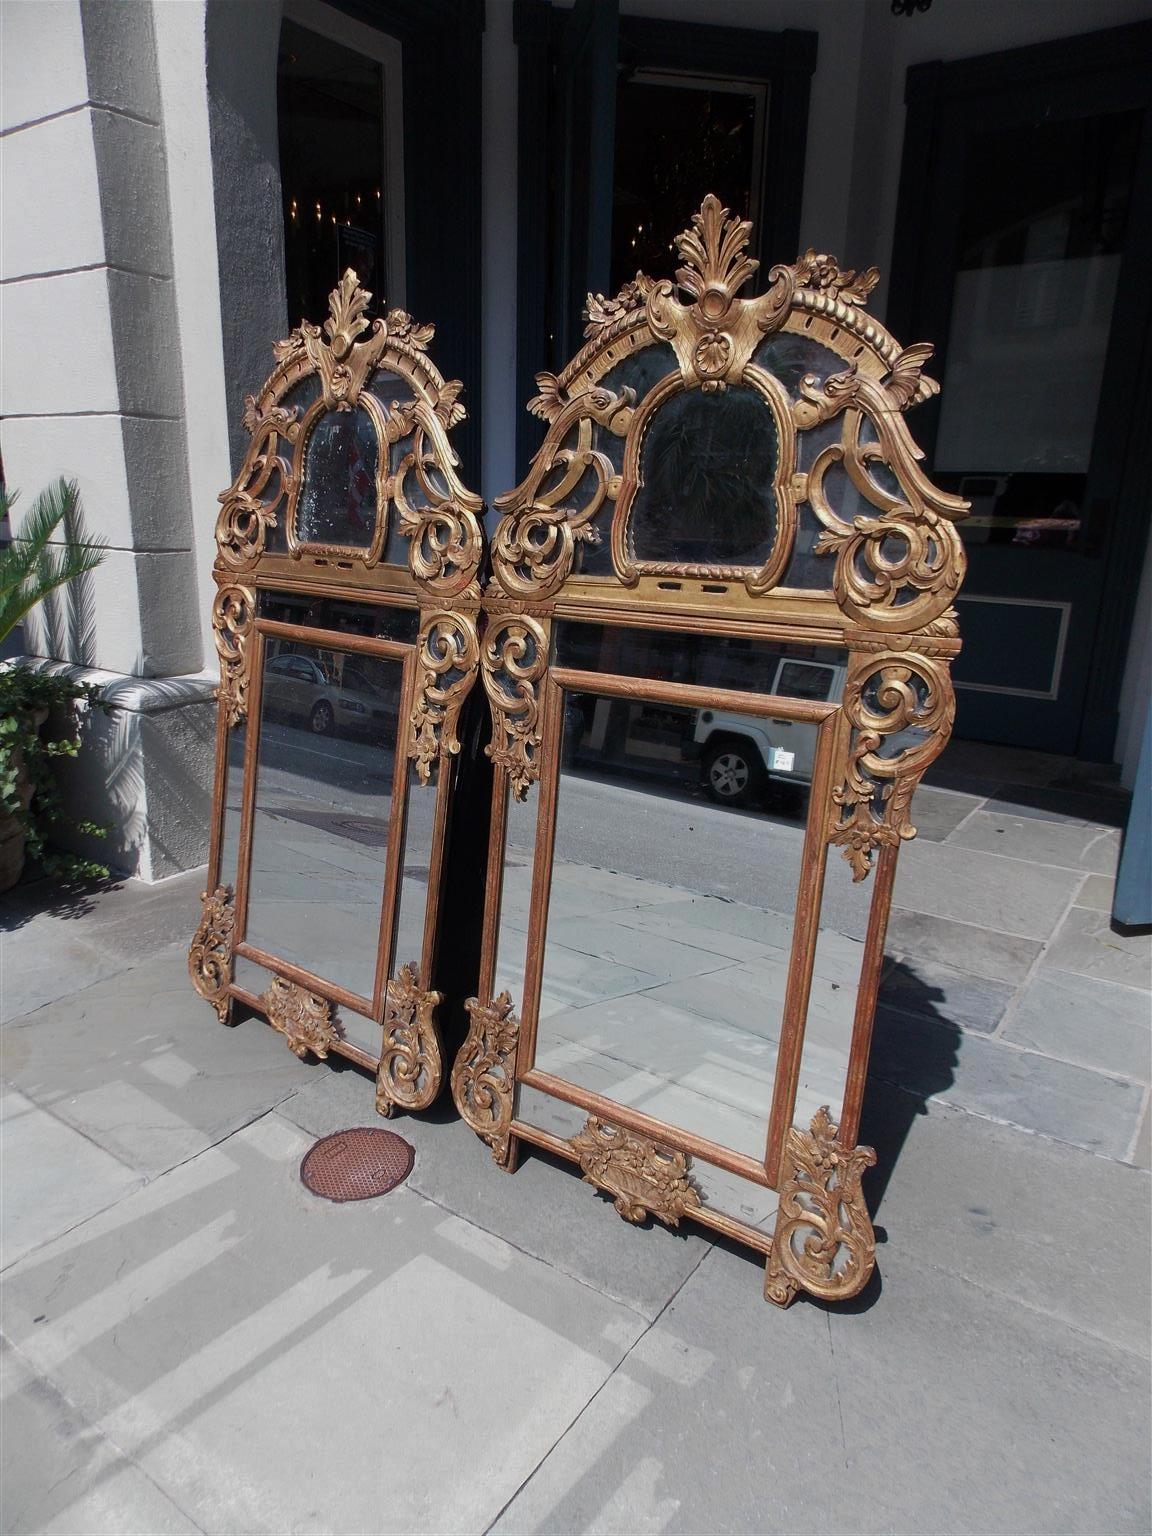 Early 19th Century Pair of Italian Neoclassical Gilt Carved Wood Foliage Crest Mirrors, Circa 1810